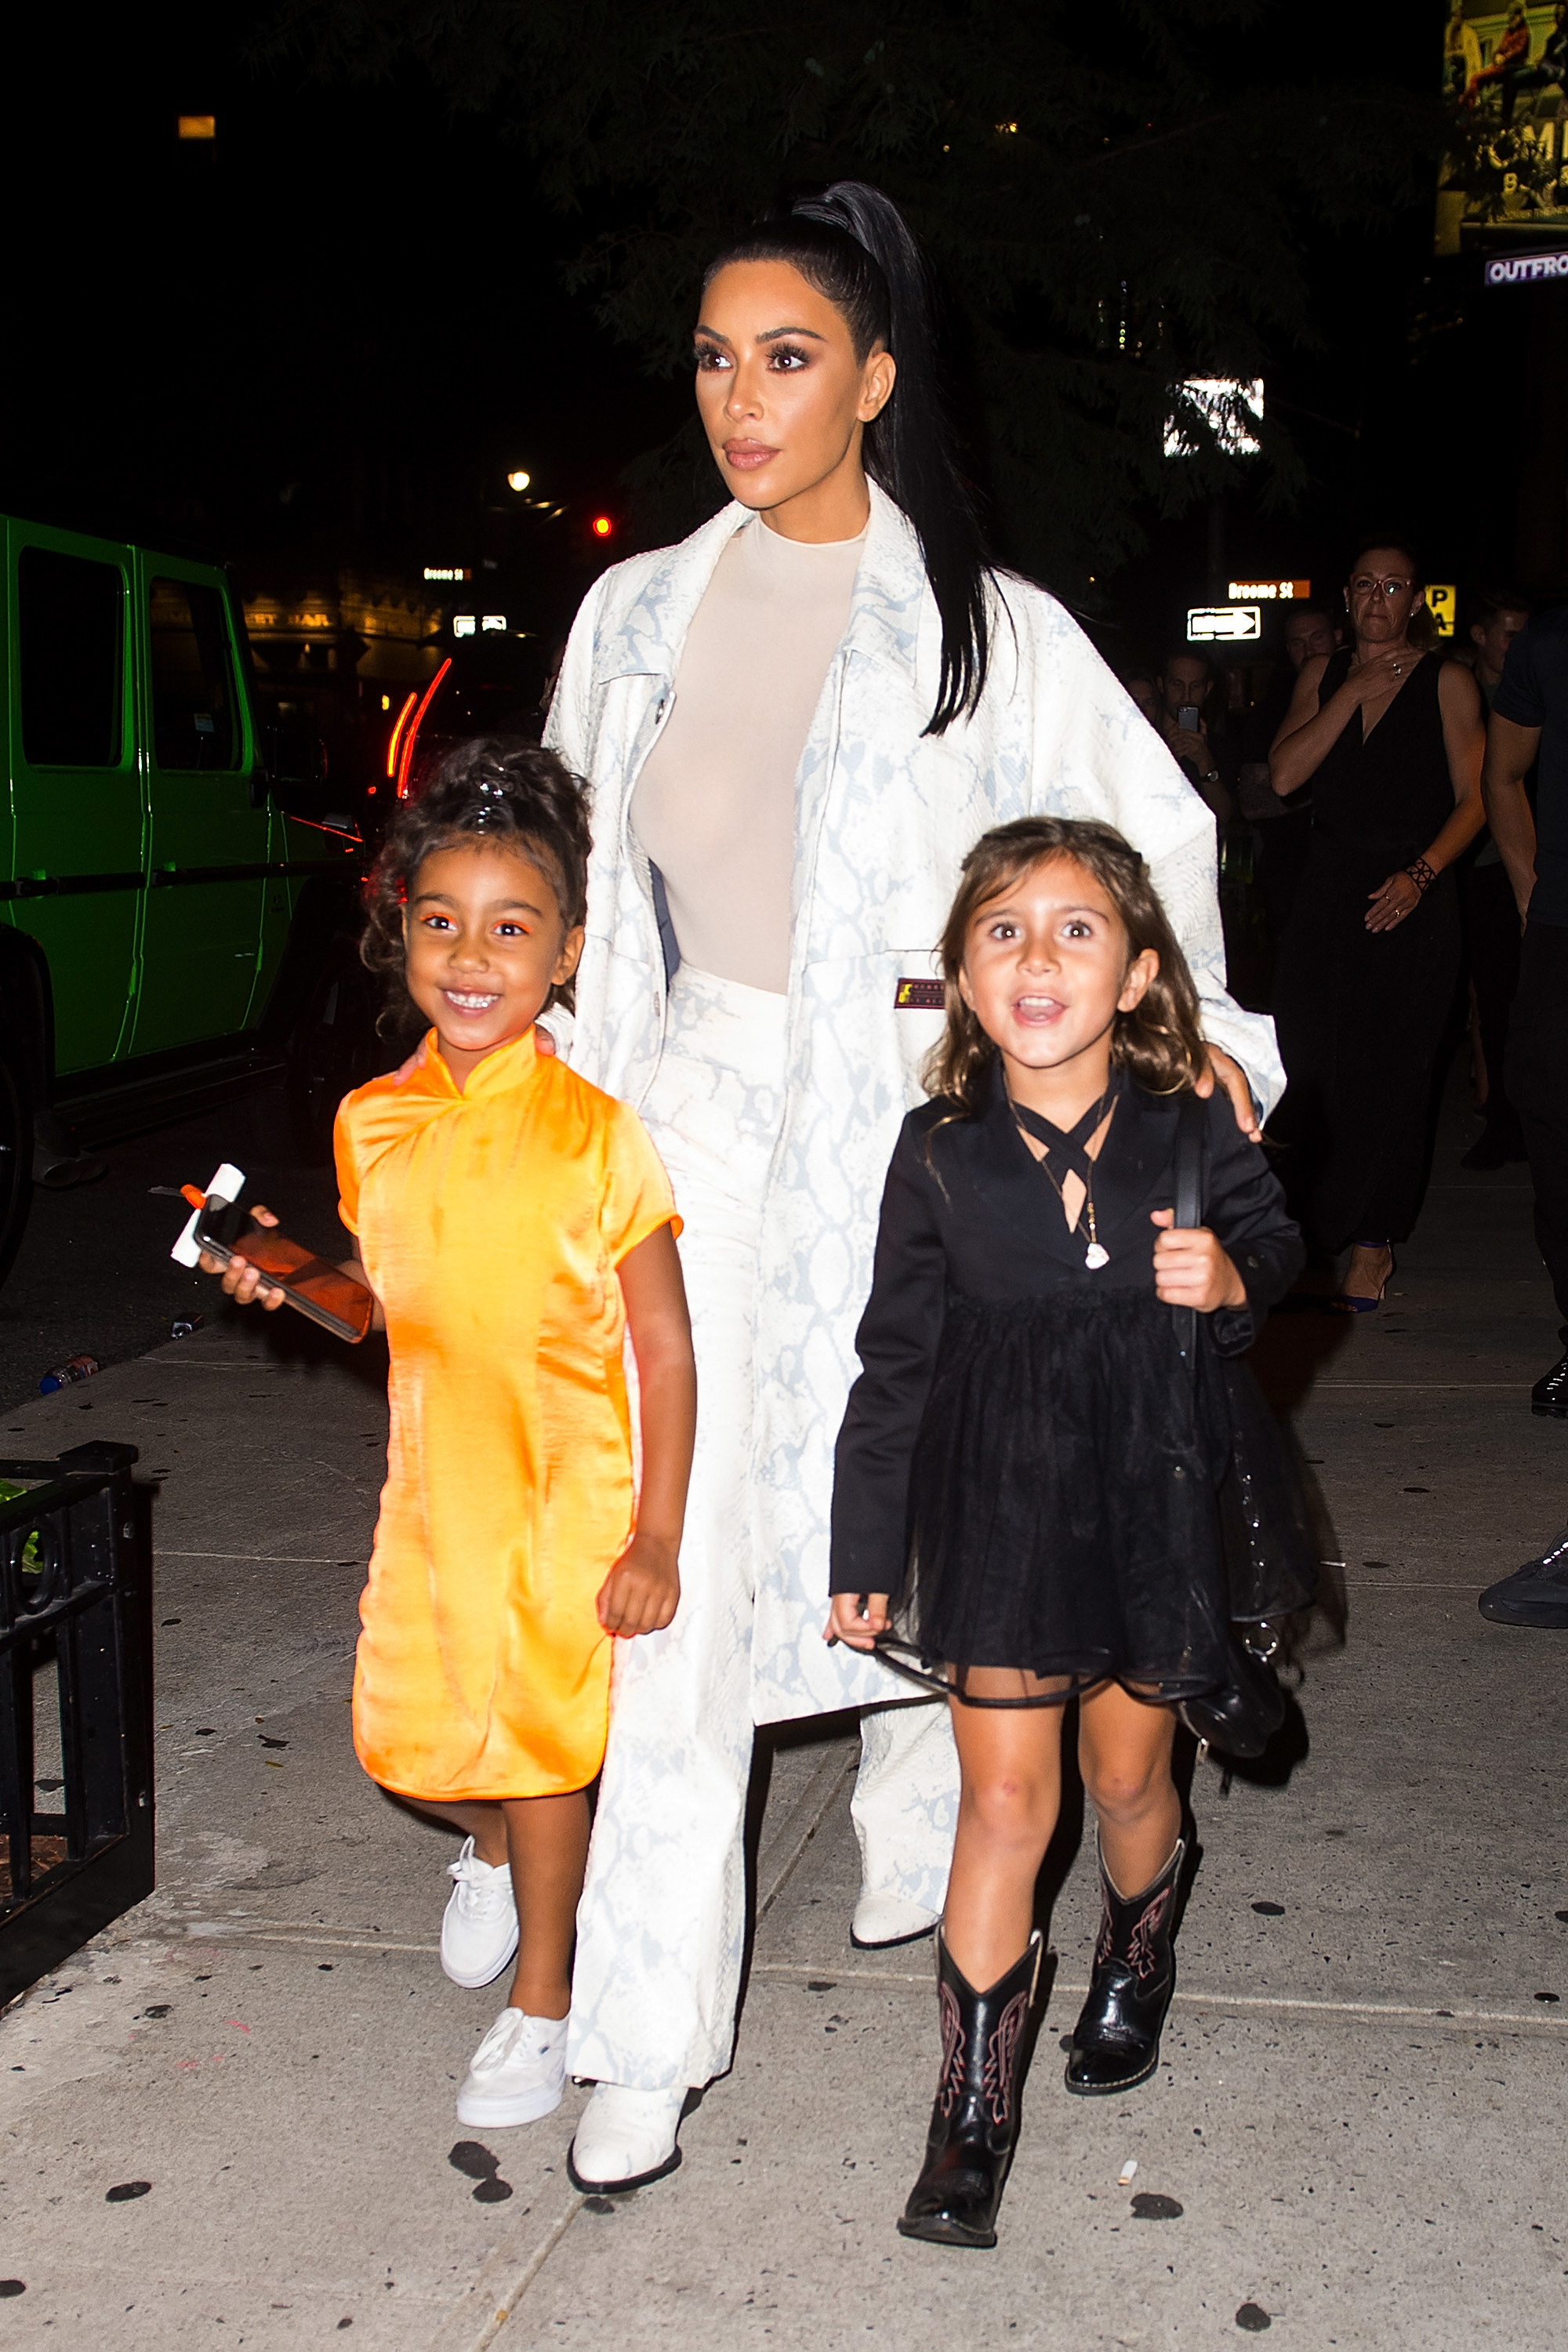 Kim walking down a sidewalk at night with North and Penelope